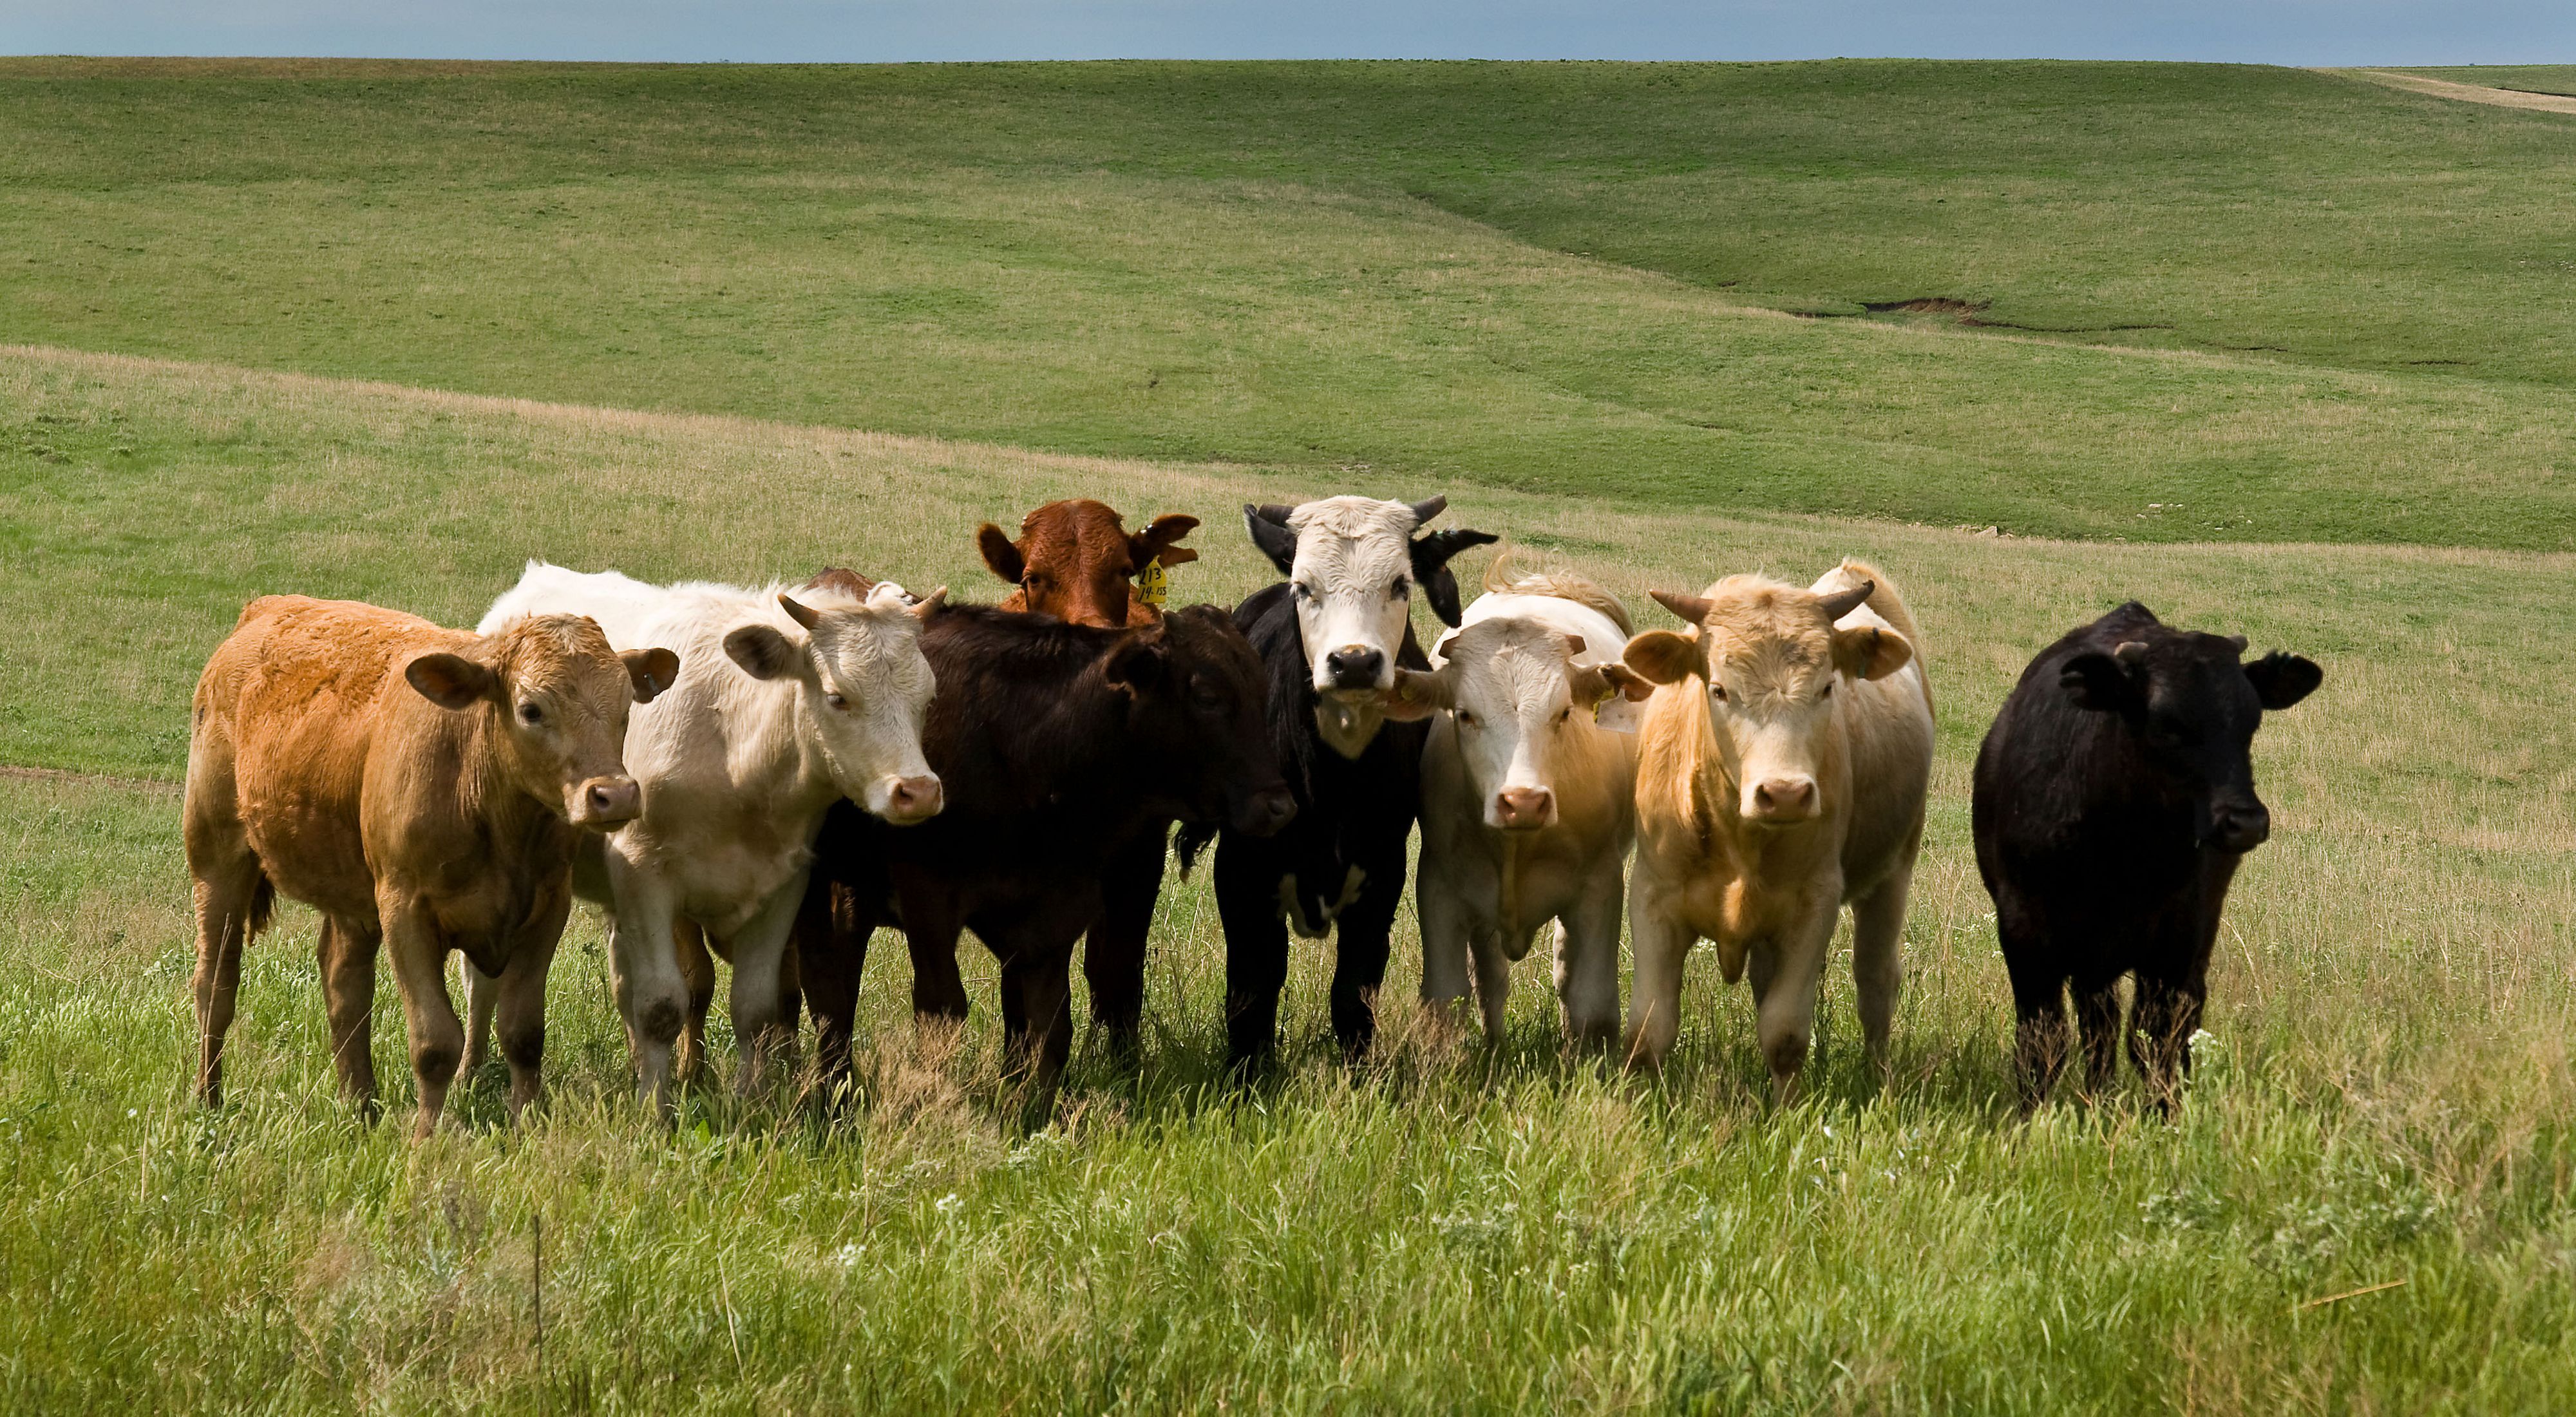 Eight cows standing in a line in a grassy green field.